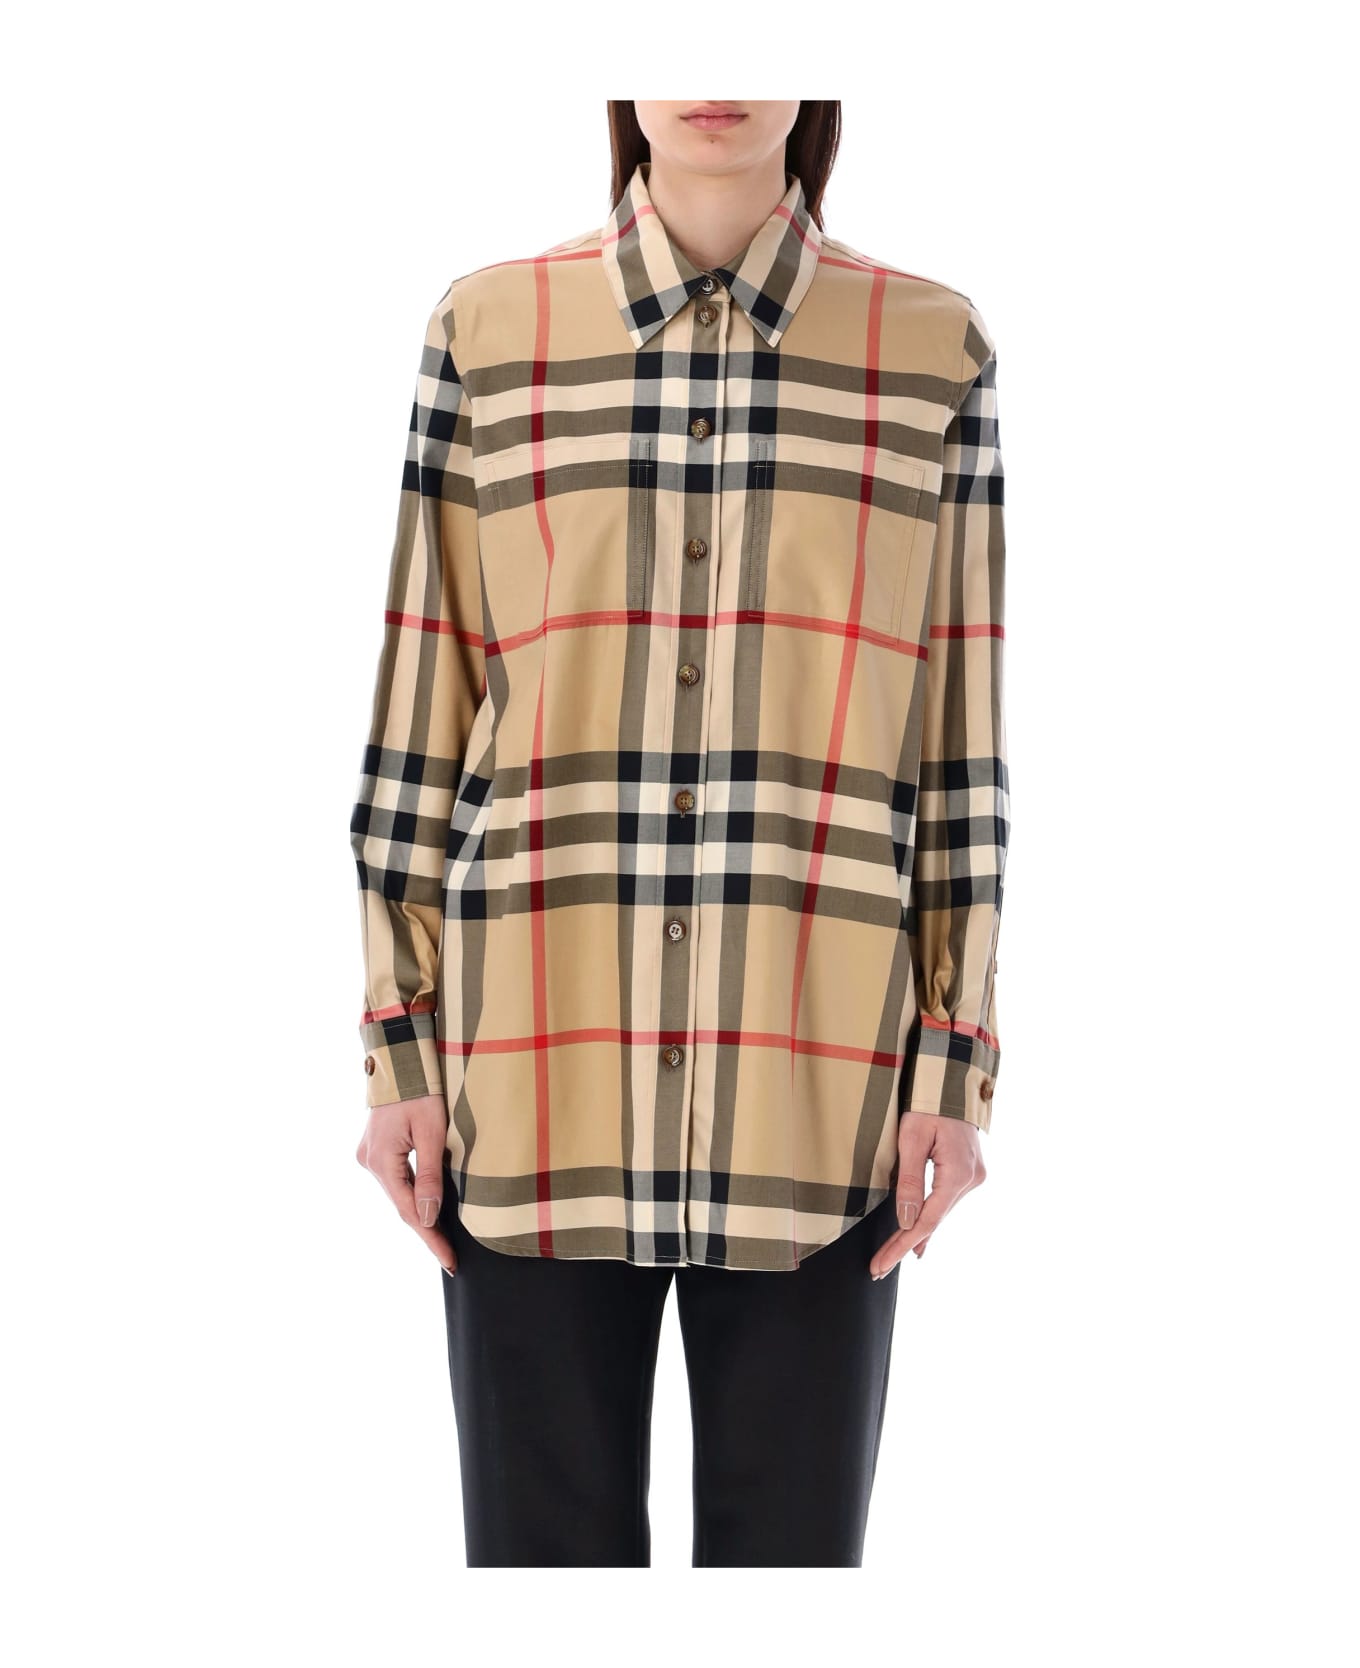 Burberry London Check Shirt - ARCHIVE BEIGE IP CHK シャツ